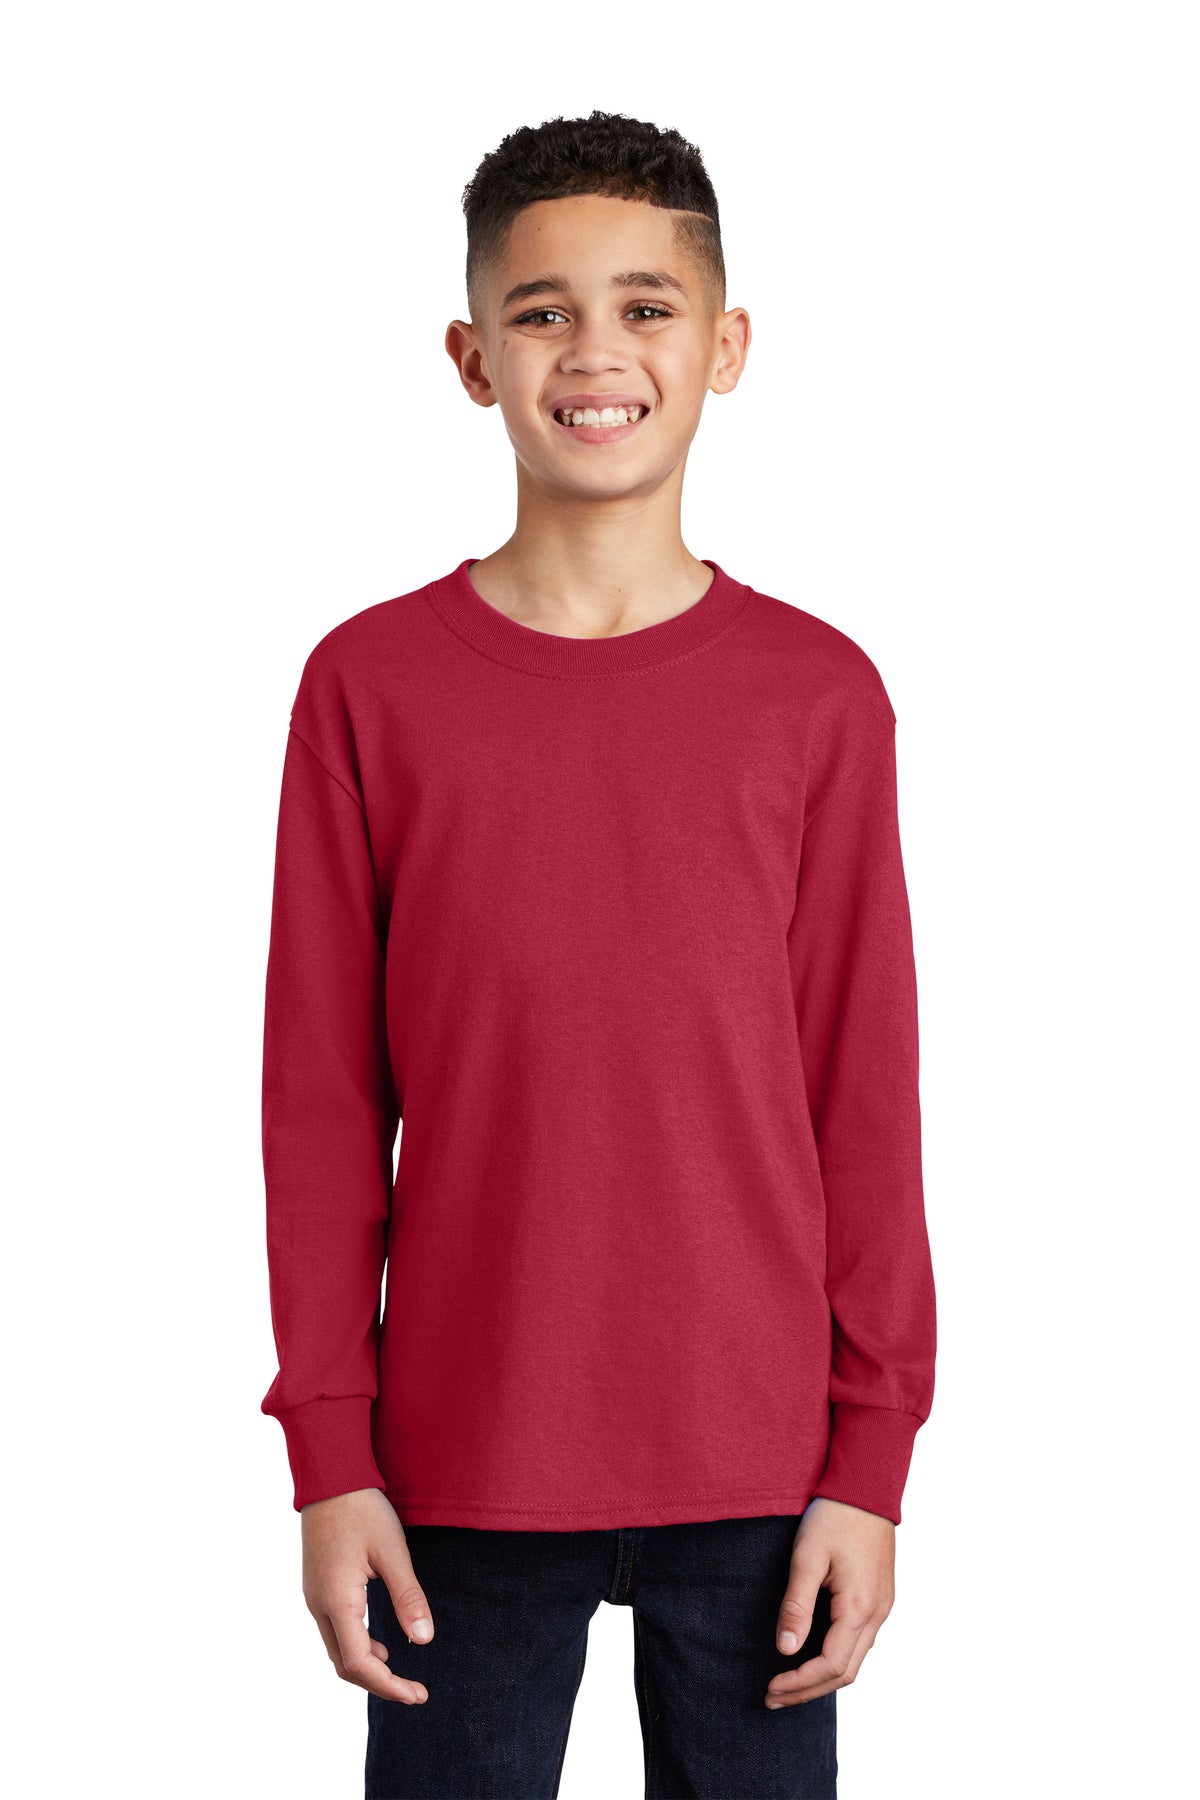 NEW STRAYER Port & Company® Youth Long Sleeve Core Cotton Tee - RED